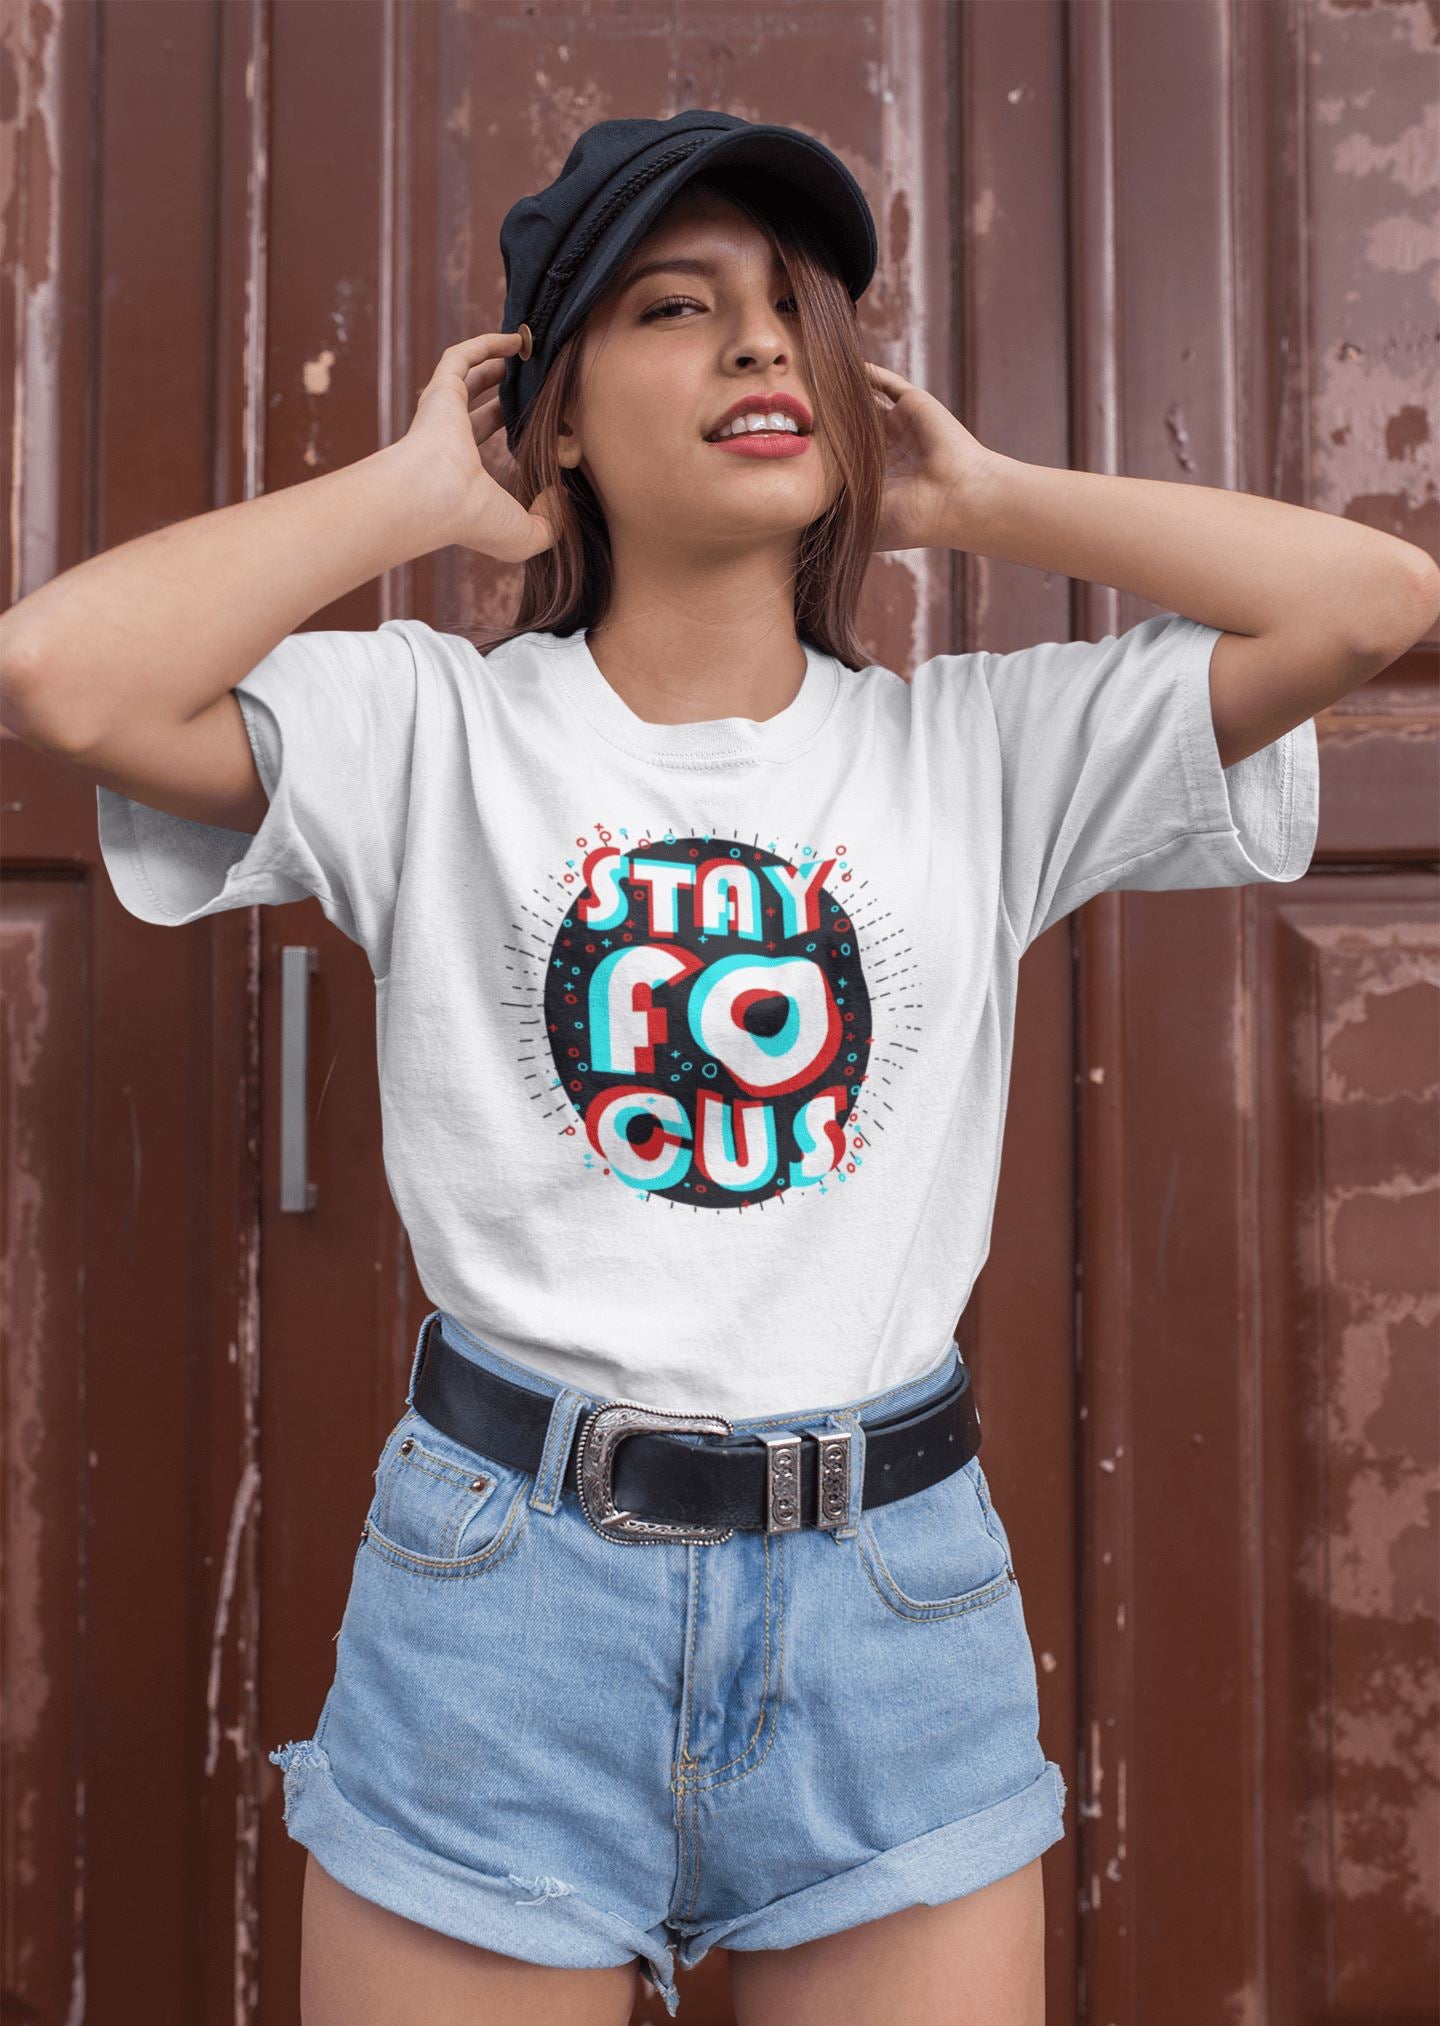 Stay Focus Supreme T Shirt for Men and Women - Catch My Drift India  clothing, female, general, made in india, shirt, t shirt, trending, tshirt, white